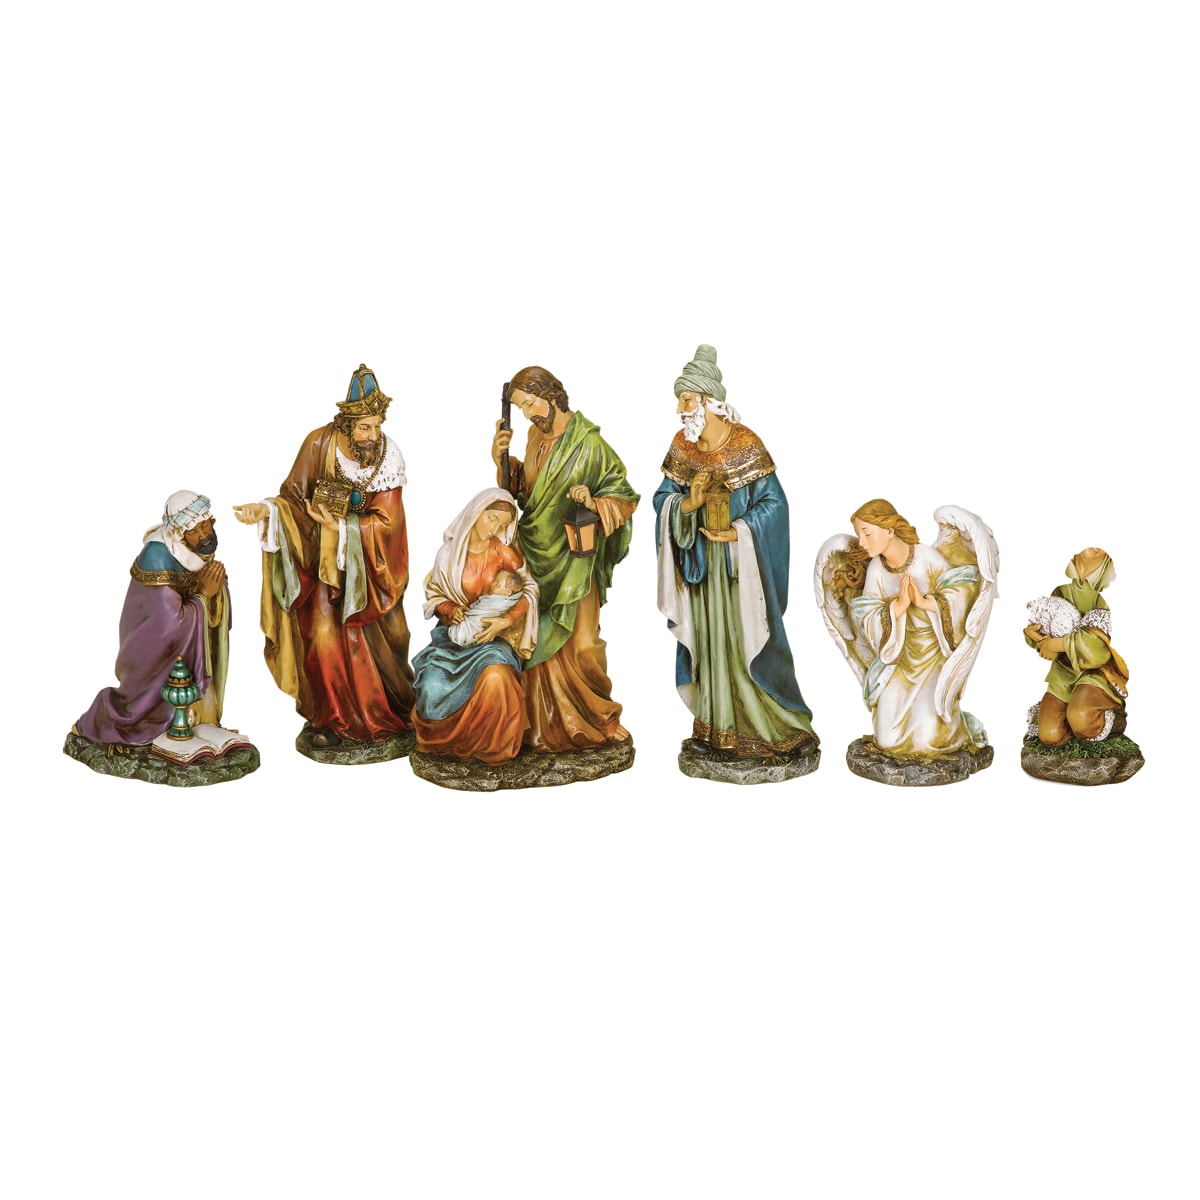 Roman 16-in Figurine Nativity (6-Pack) Christmas Decor at Lowes.com